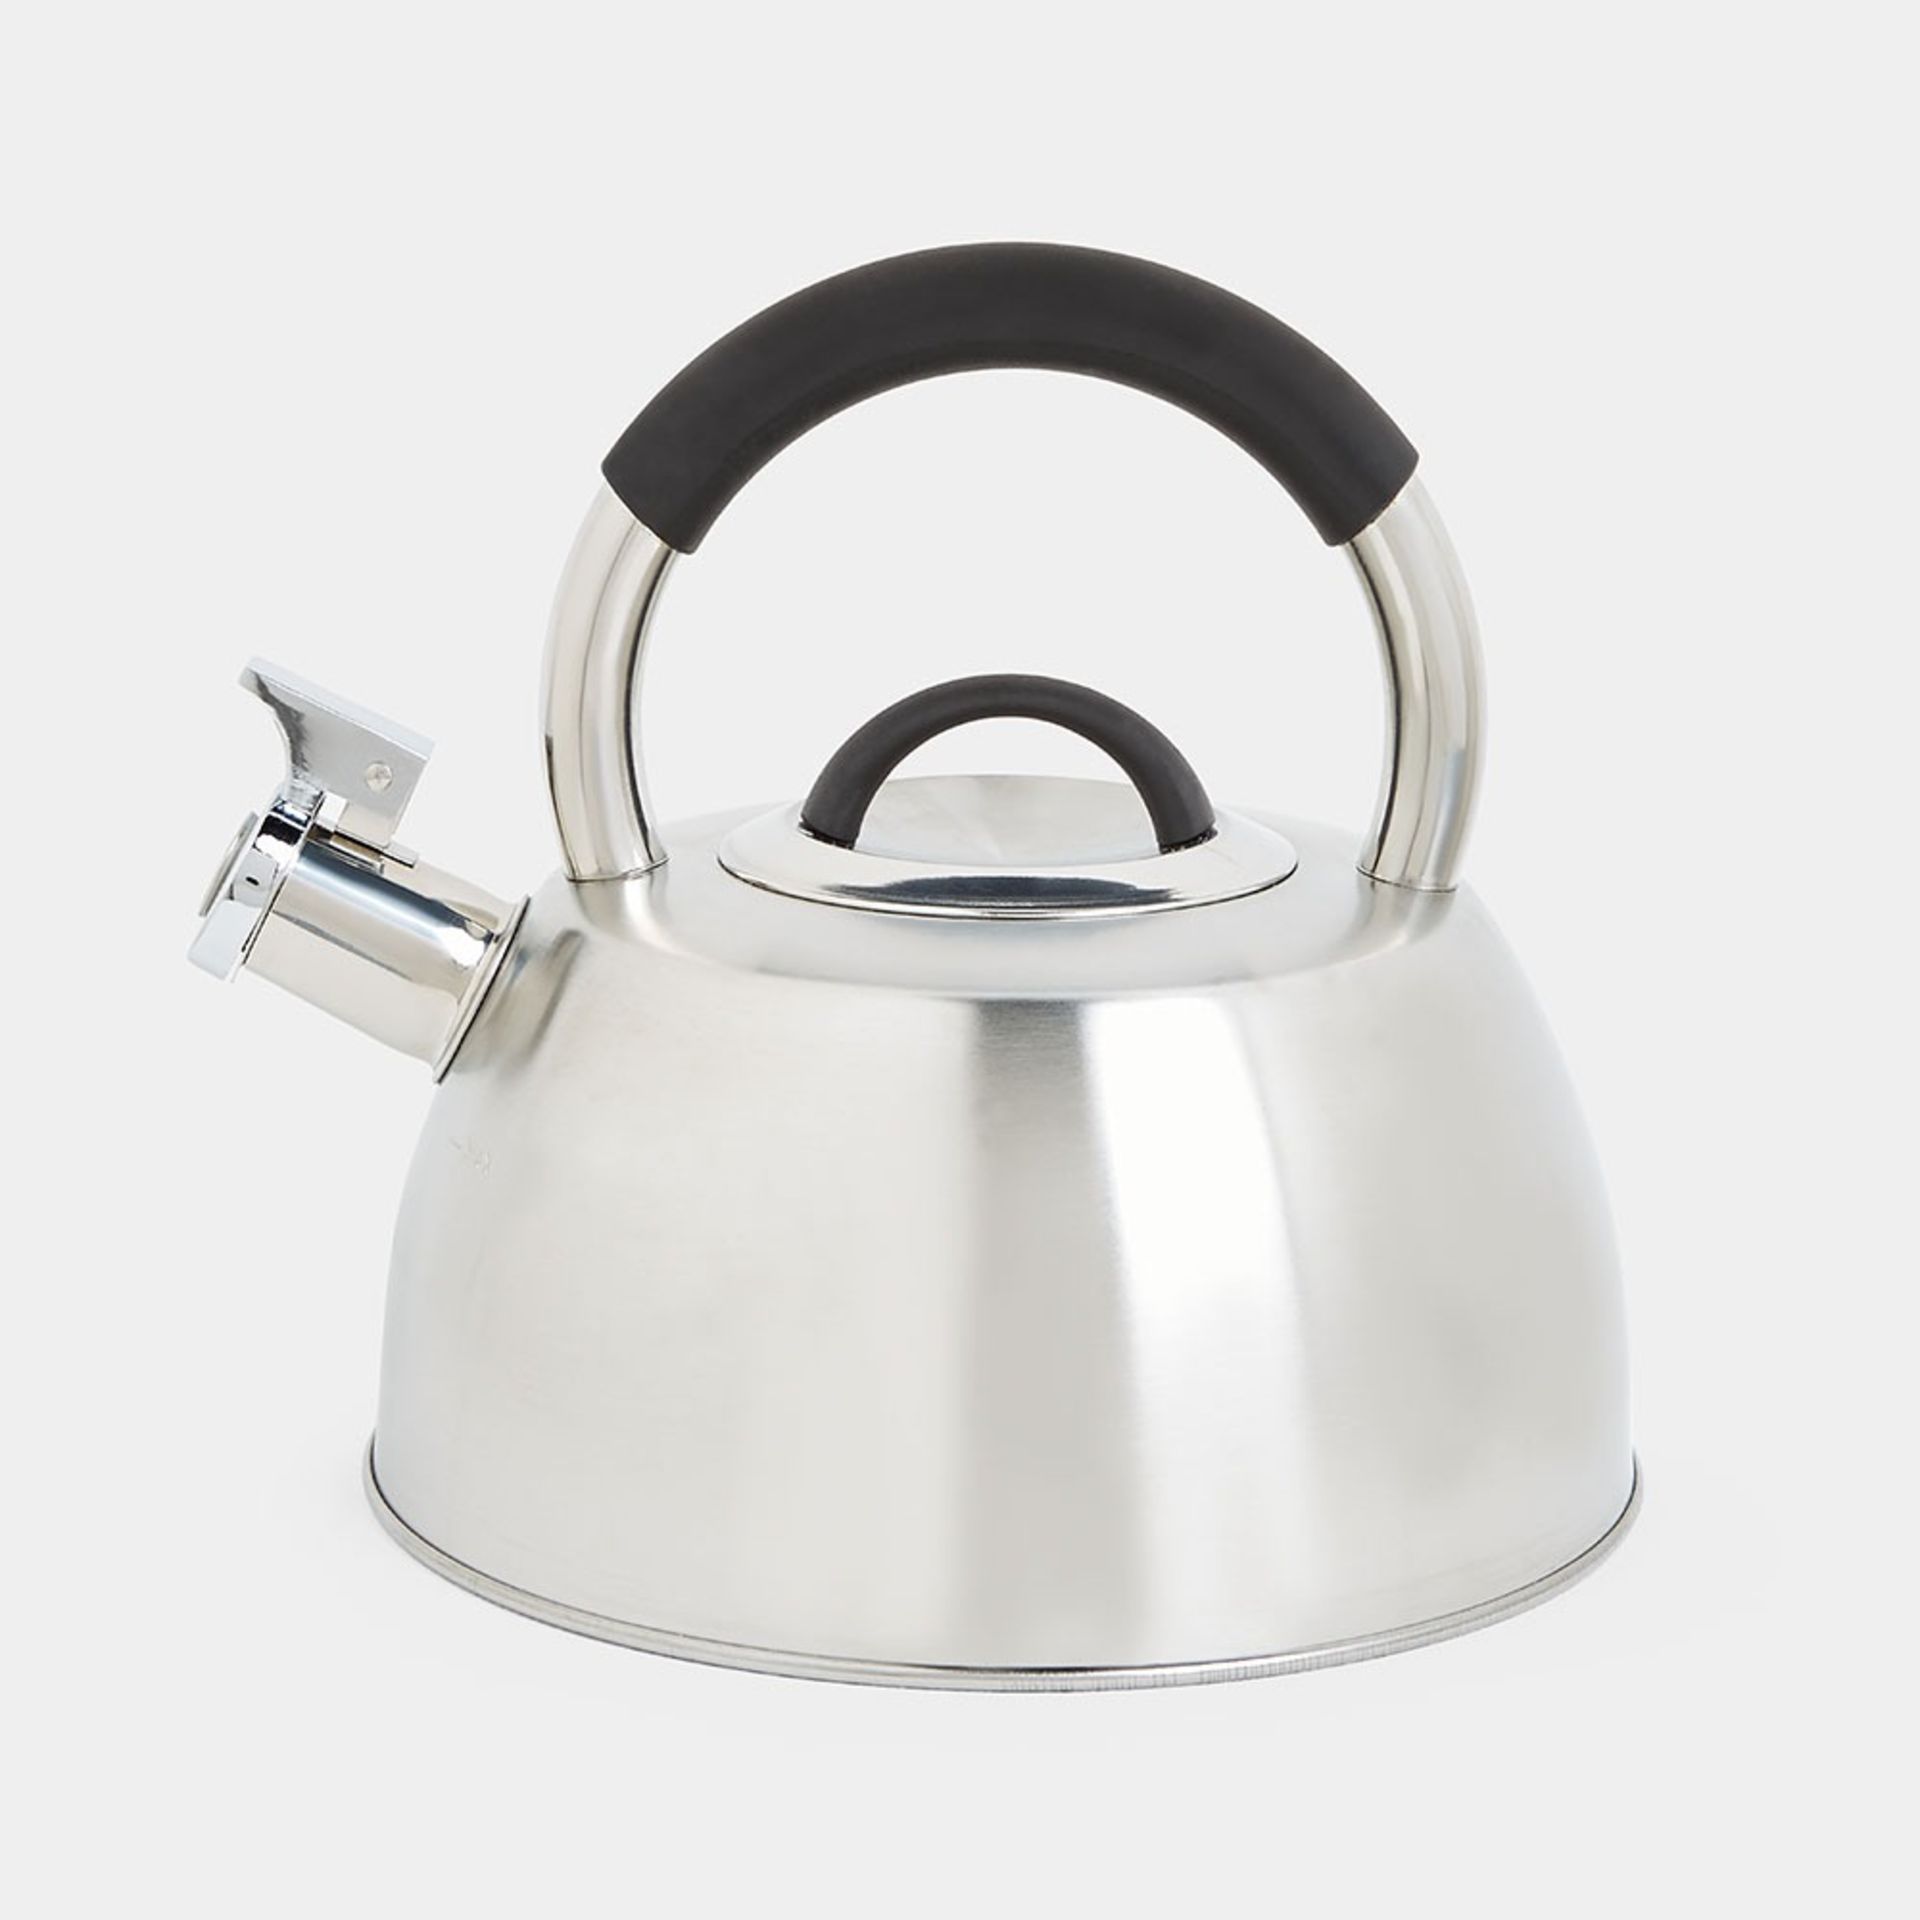 Silver Stainless Steel Whistling Stove Top Kettle - 2.5L - ER32